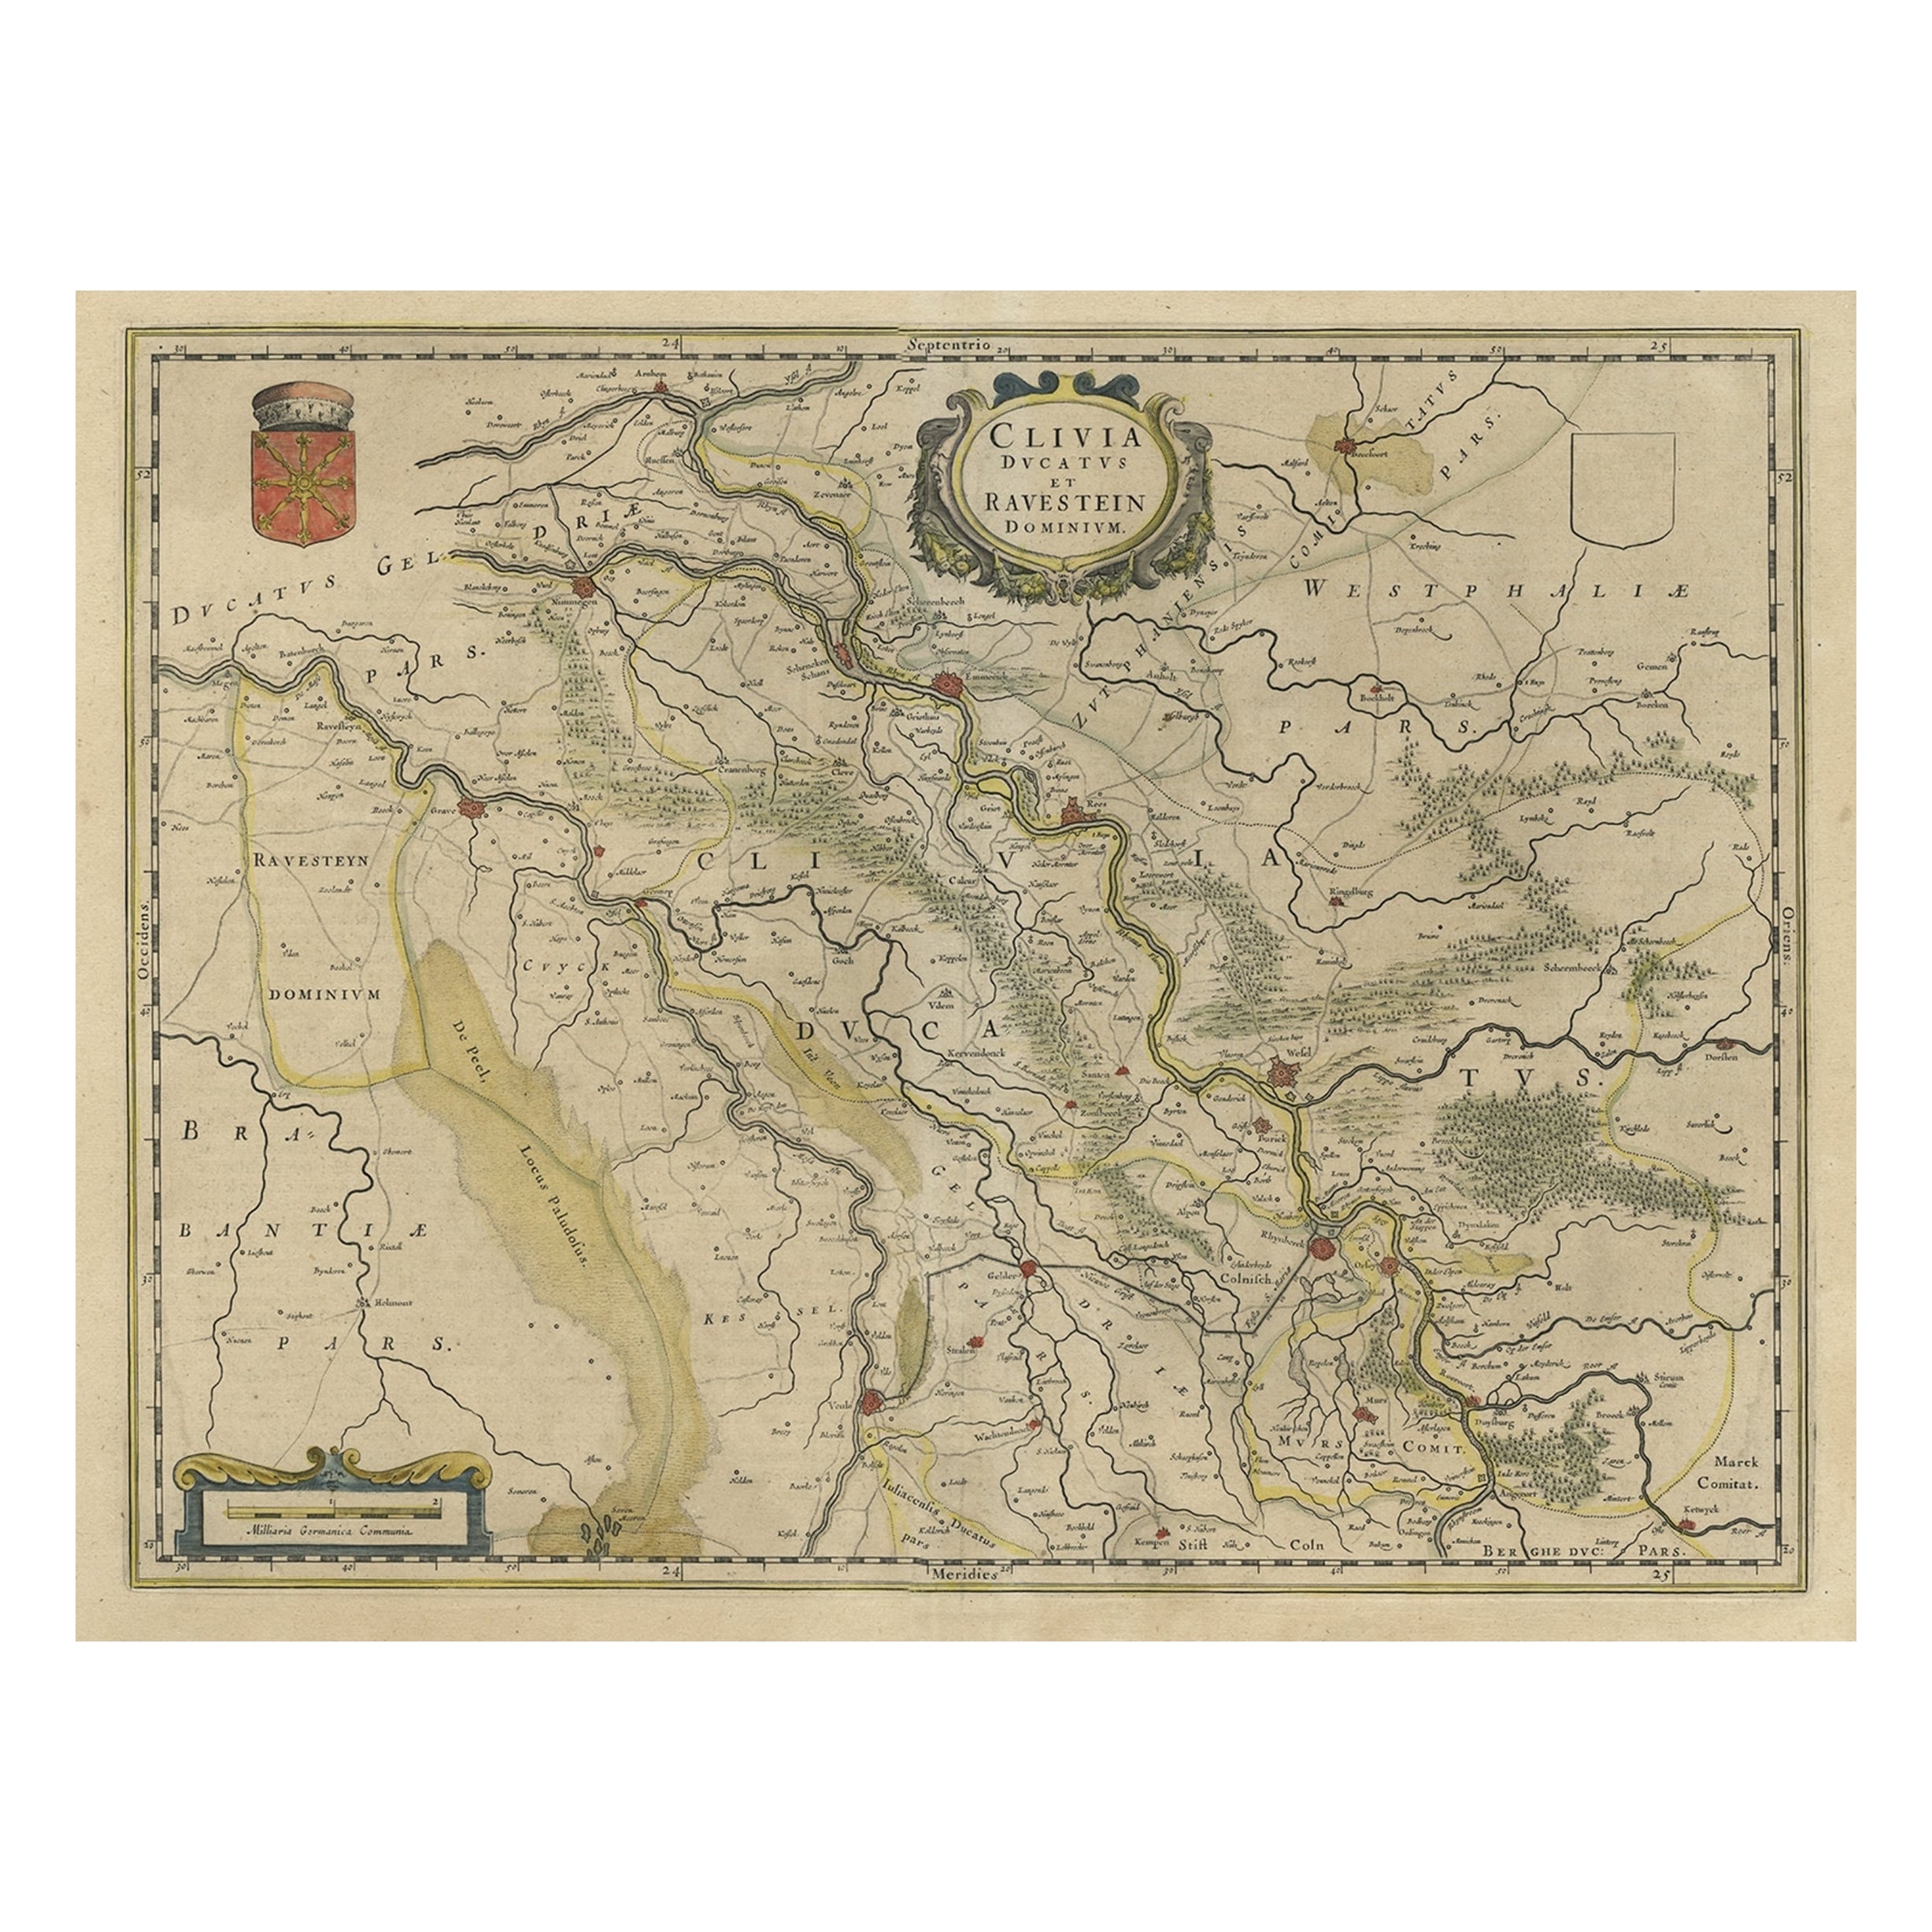 Map of the Duchy Clivia & Ravestein, Brabant in The Netherlands & Germany, 1635 For Sale